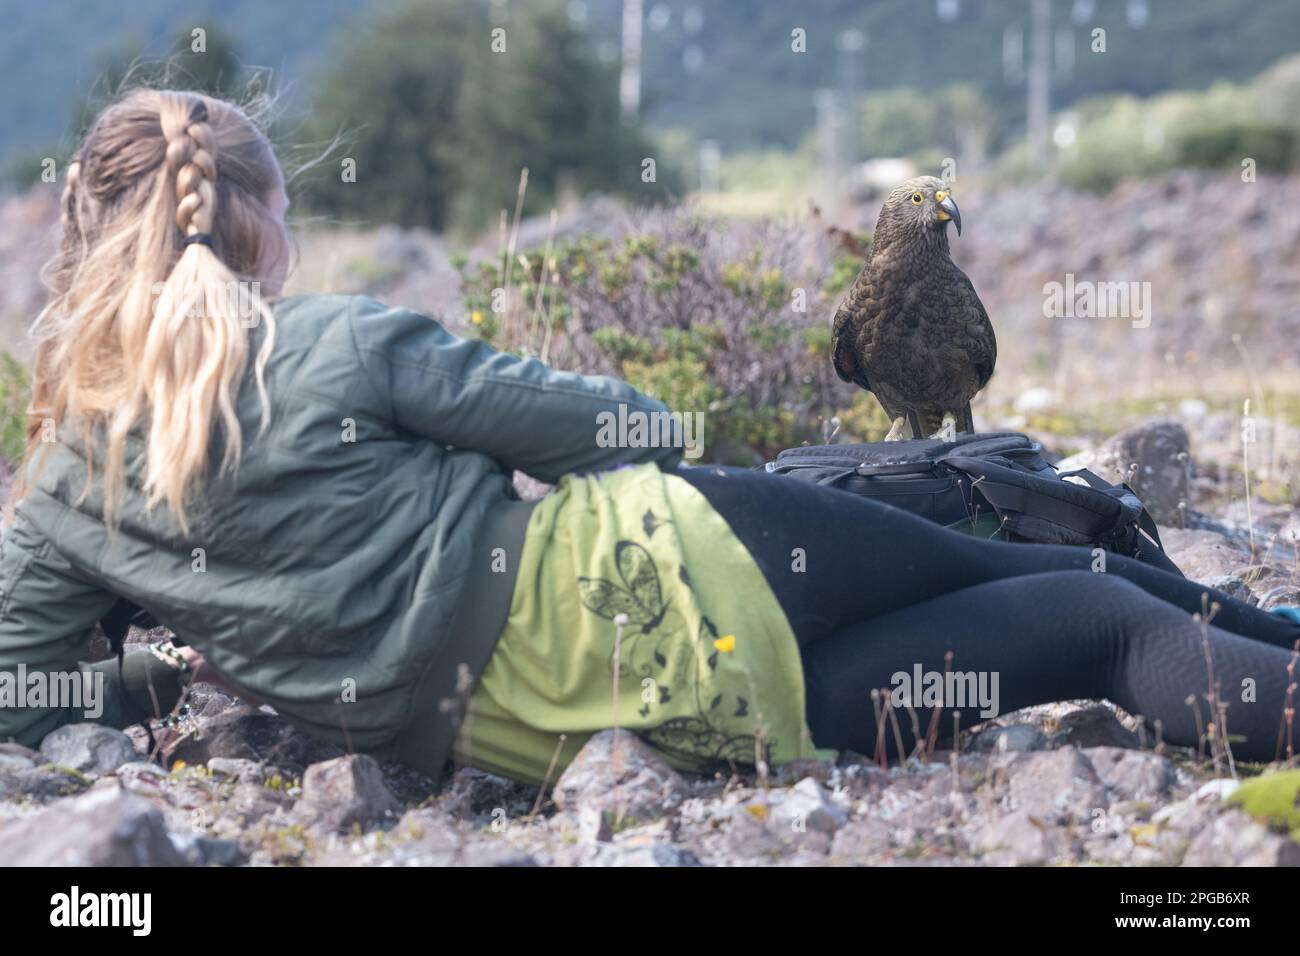 A woman watches as a kea (Nestor notabilis) closely approaches her in Arthur's Pass National Park in the South island of Aotearoa New Zealand. Stock Photo